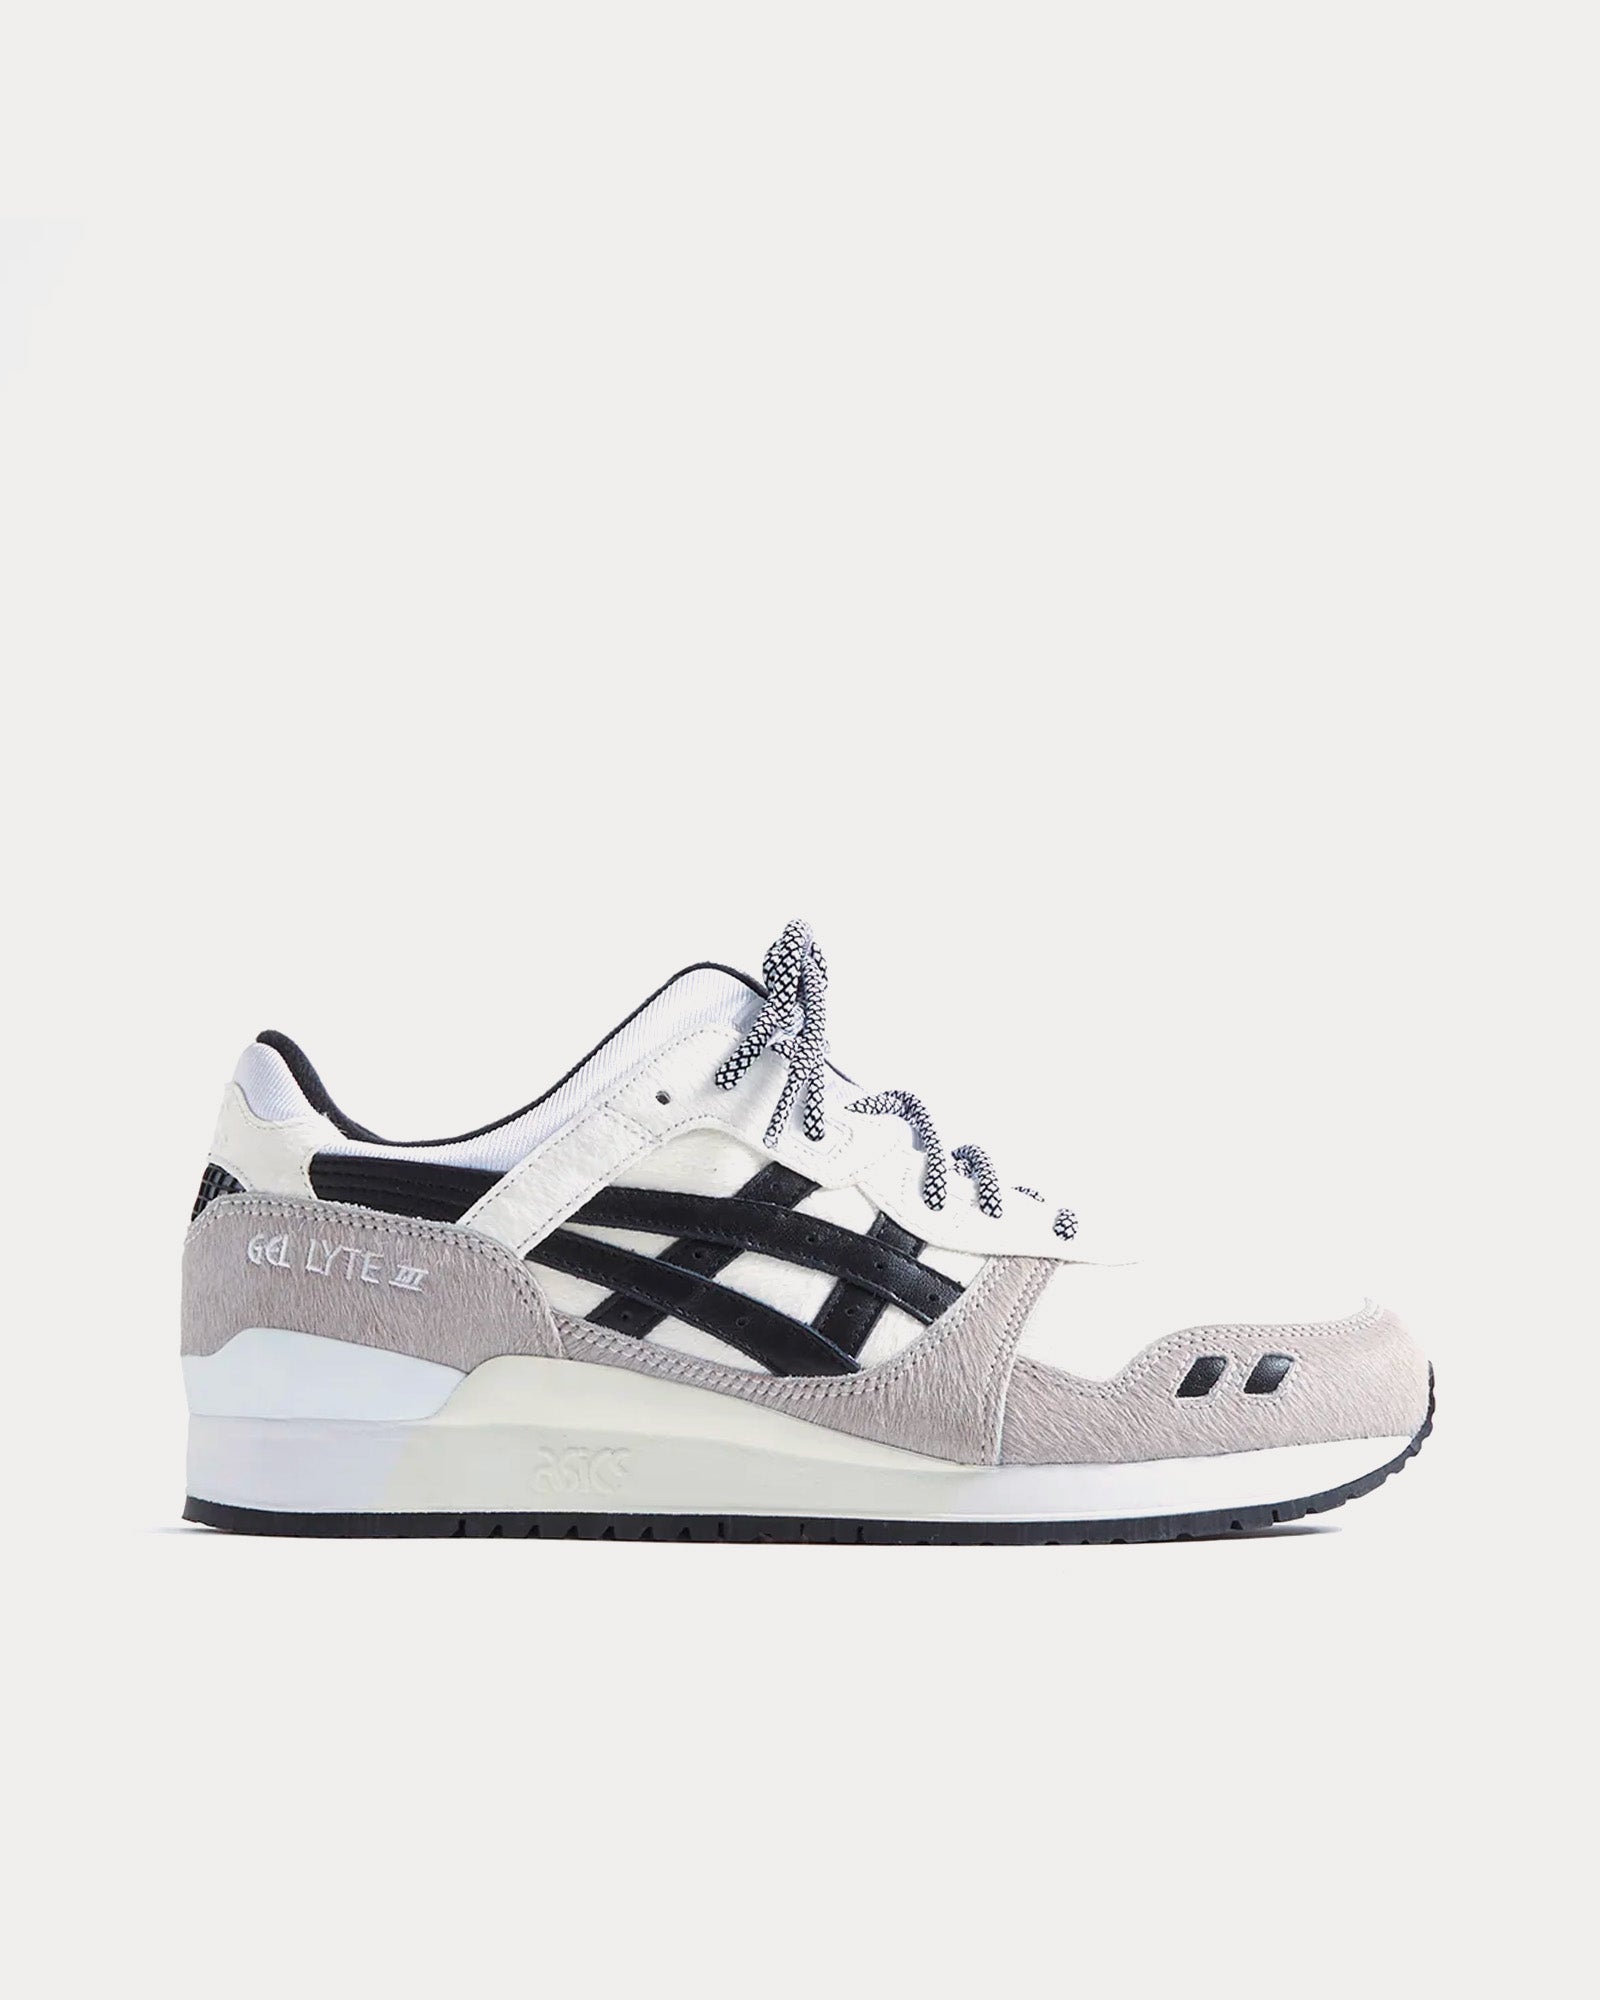 Asics x Kith - Marvel Gel-Lyte III Remastered 'Storm' Grey Low Top Sneakers